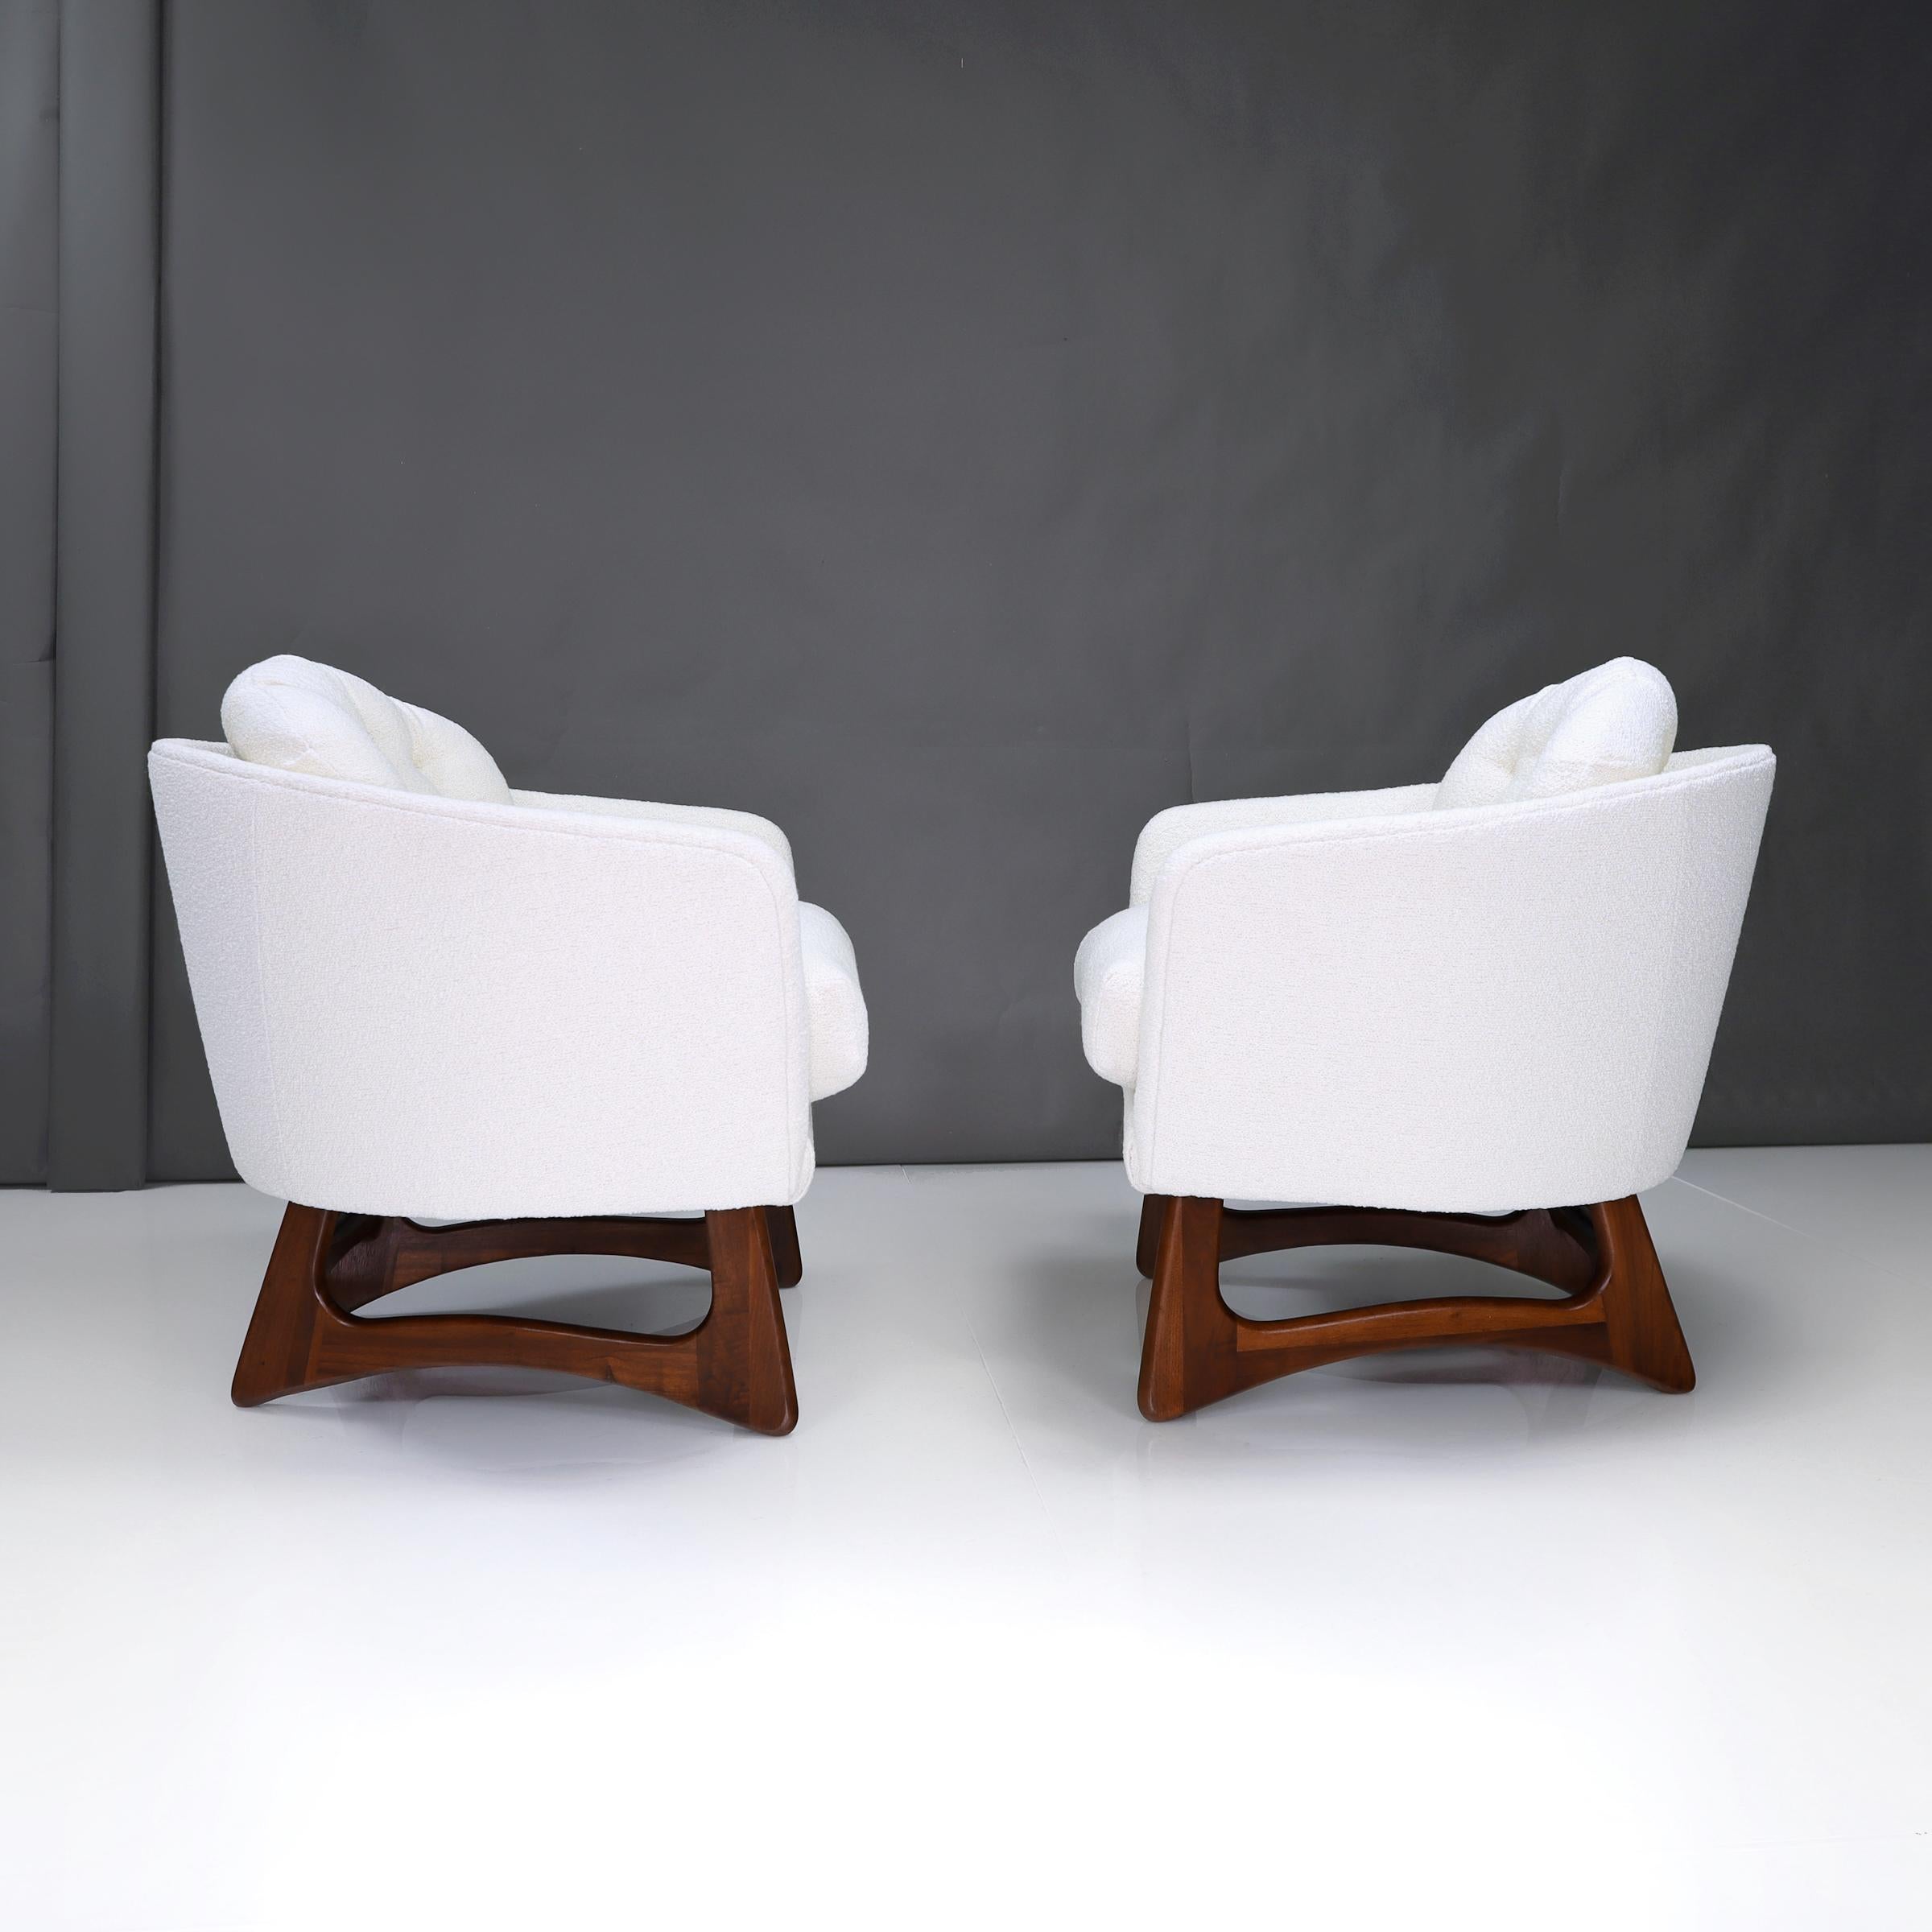 American 1960s Adrian Pearsall for Craft Associates Barrel Chairs - A Pair